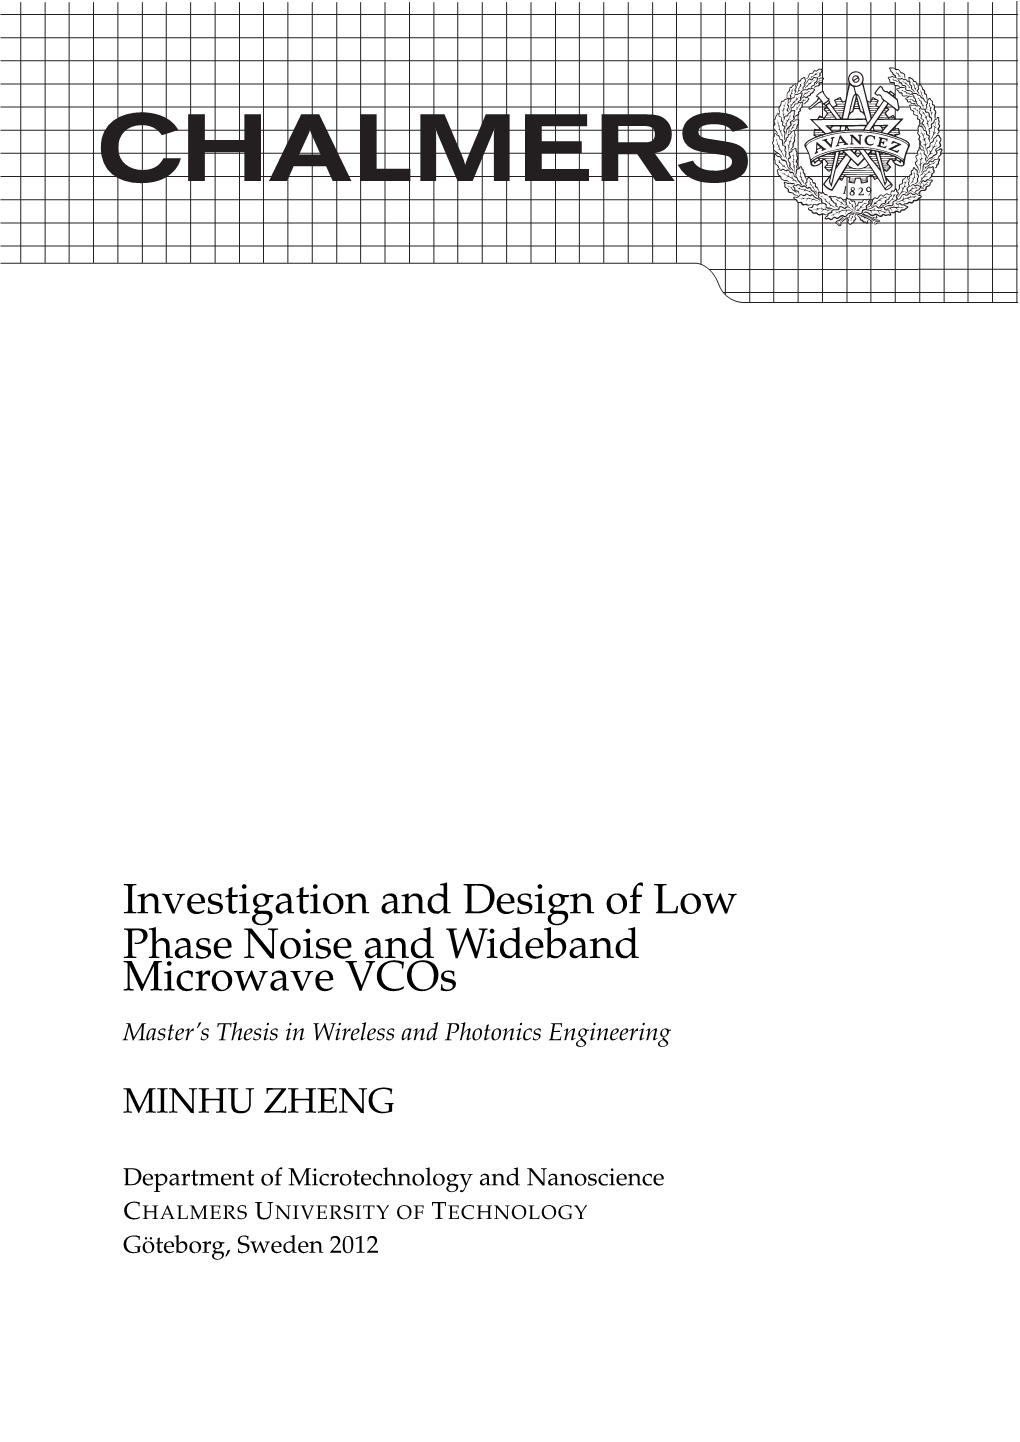 Investigation and Design of Low Phase Noise and Wideband Microwave Vcos